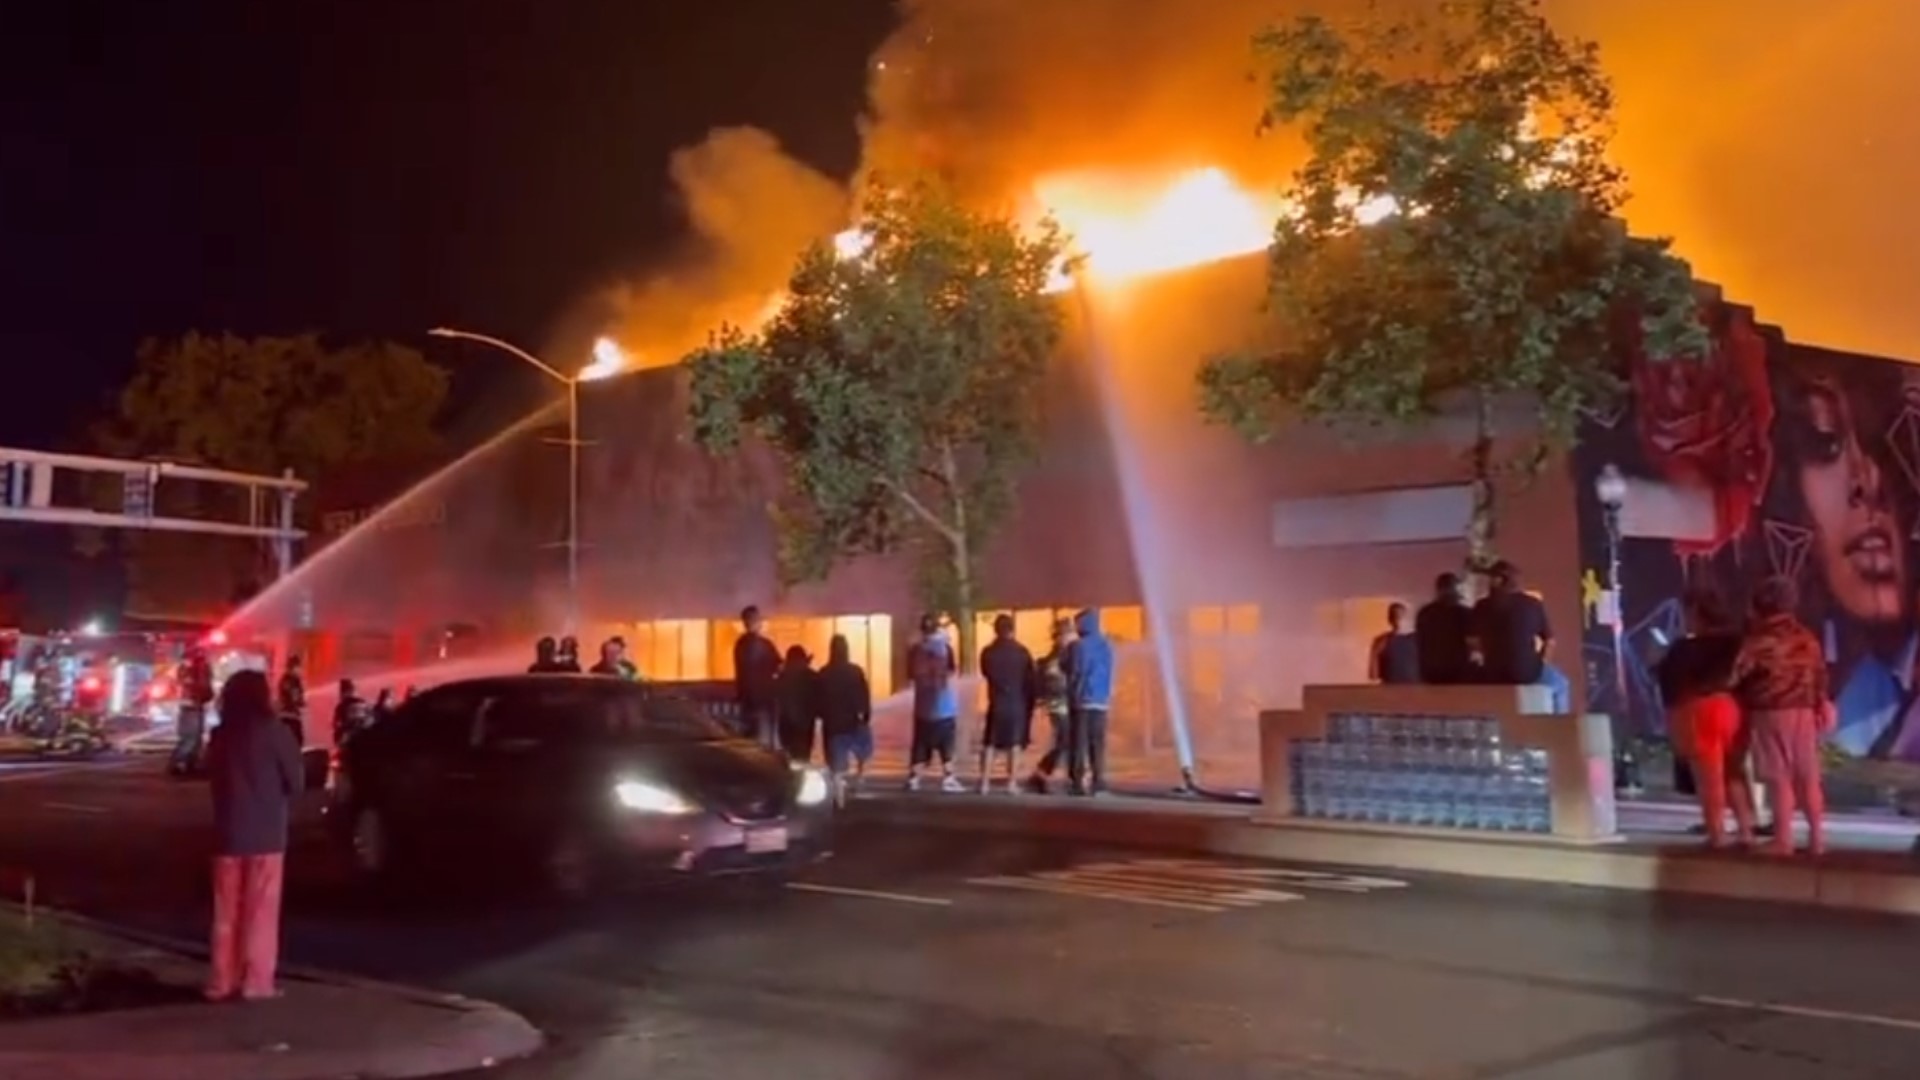 The Sacramento Fire Department is investigating the cause of a three-alarm blaze that destroyed a popular business early Sunday morning.